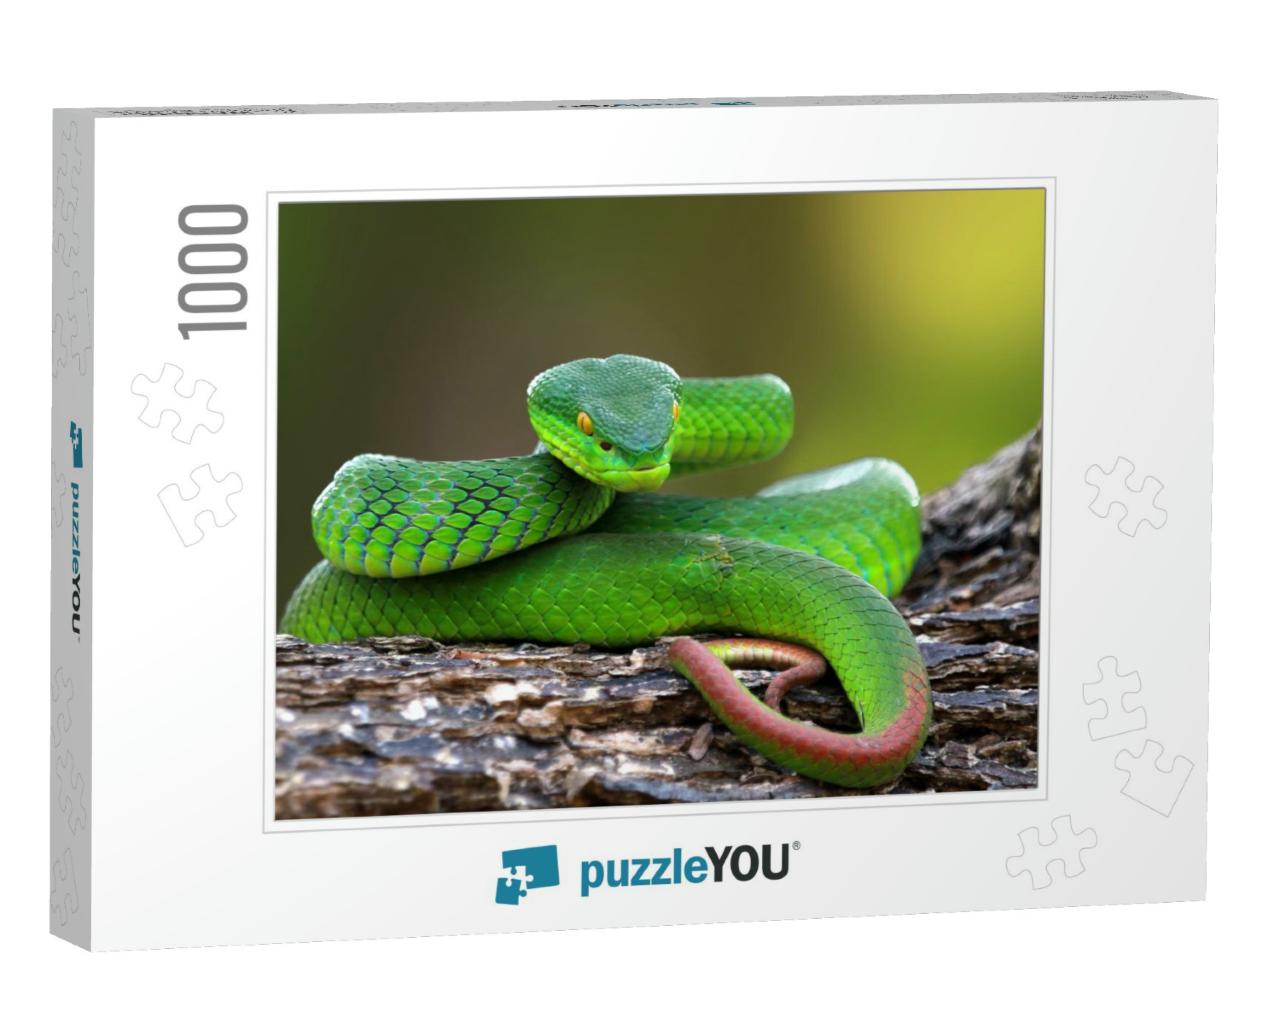 Trimisurus Albolabris, Green Snake Closeup on Branch, Ani... Jigsaw Puzzle with 1000 pieces